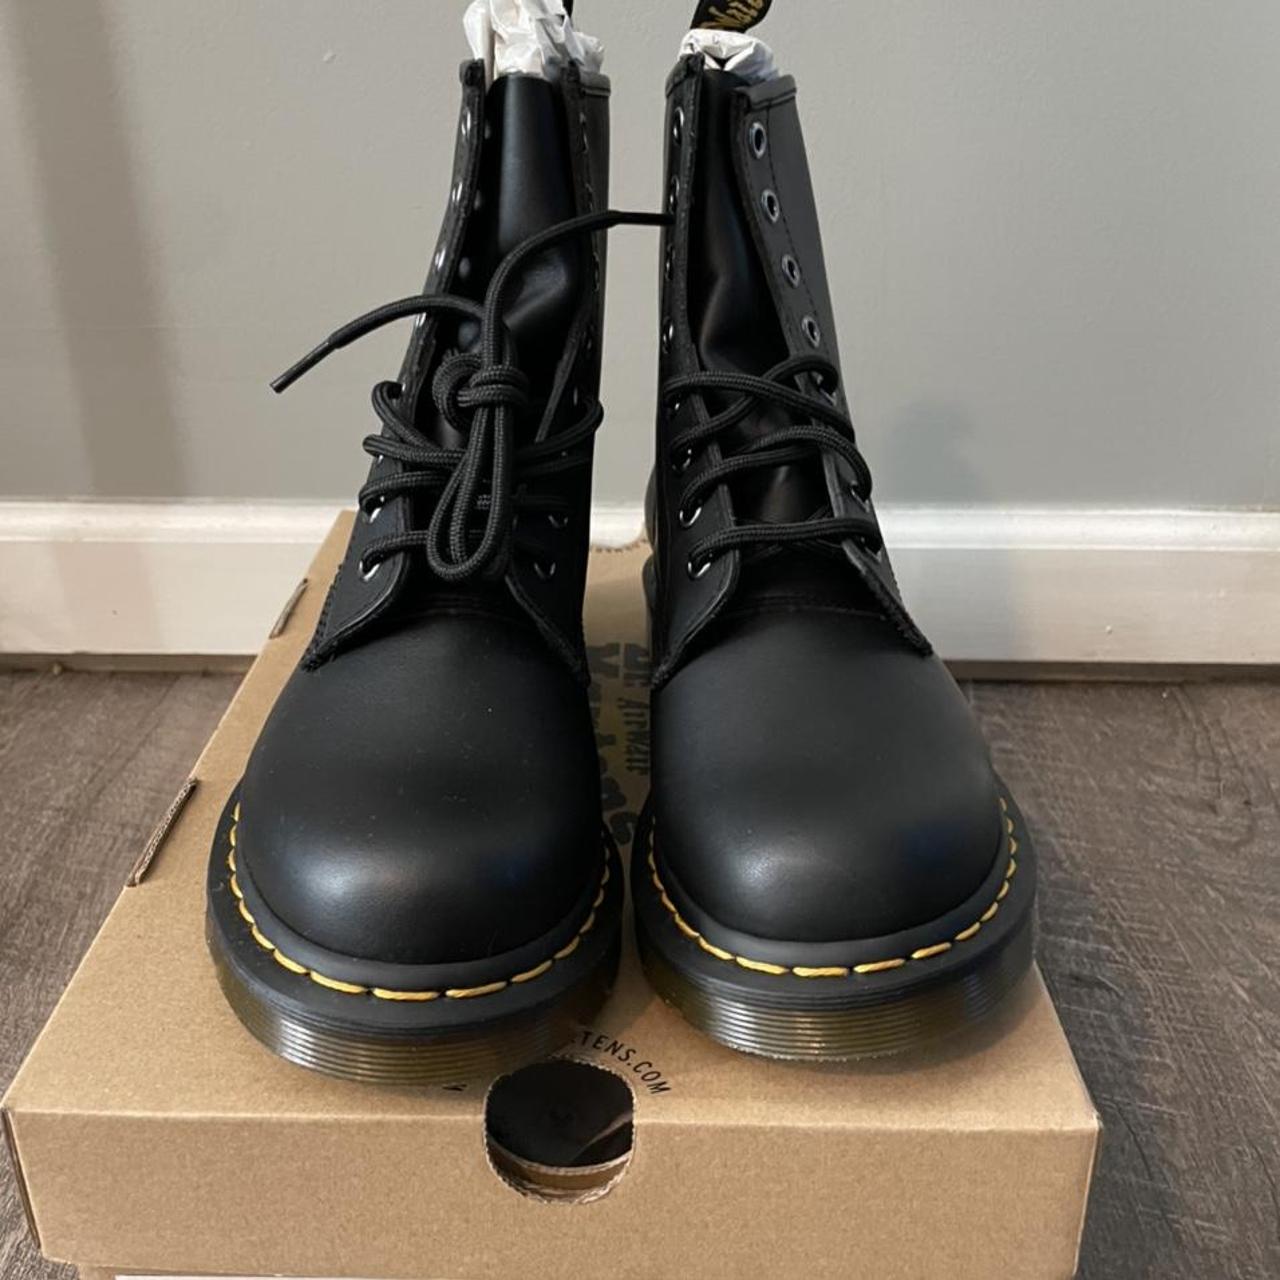 Dr. Martens 1460 WOMEN'S SMOOTH LEATHER LACE UP... - Depop